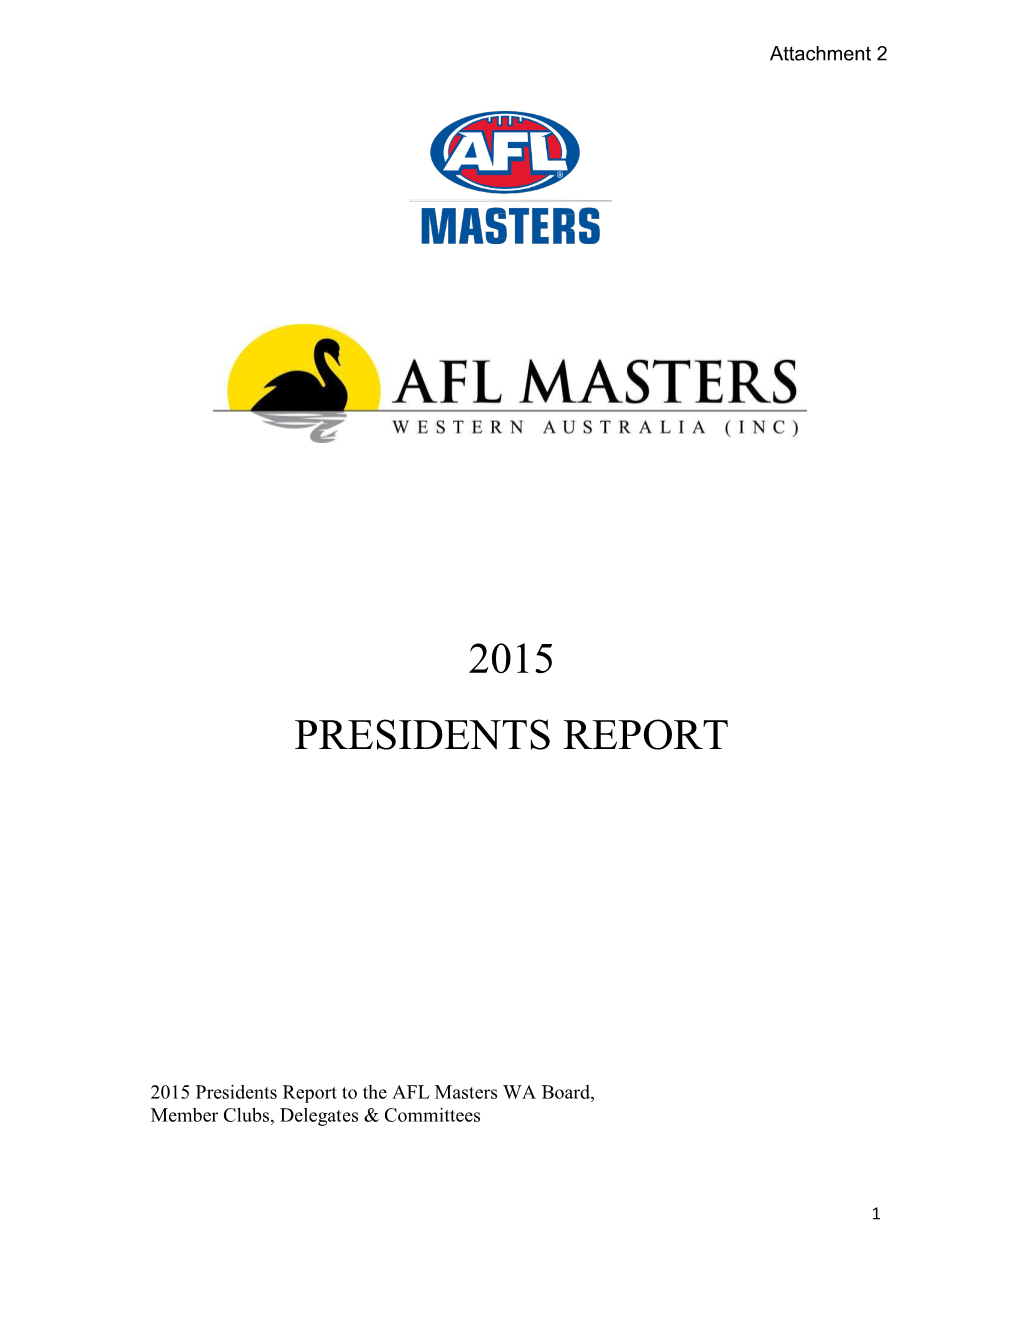 2015 Presidents Report to the AFL Masters WA Board, Member Clubs, Delegates & Committees